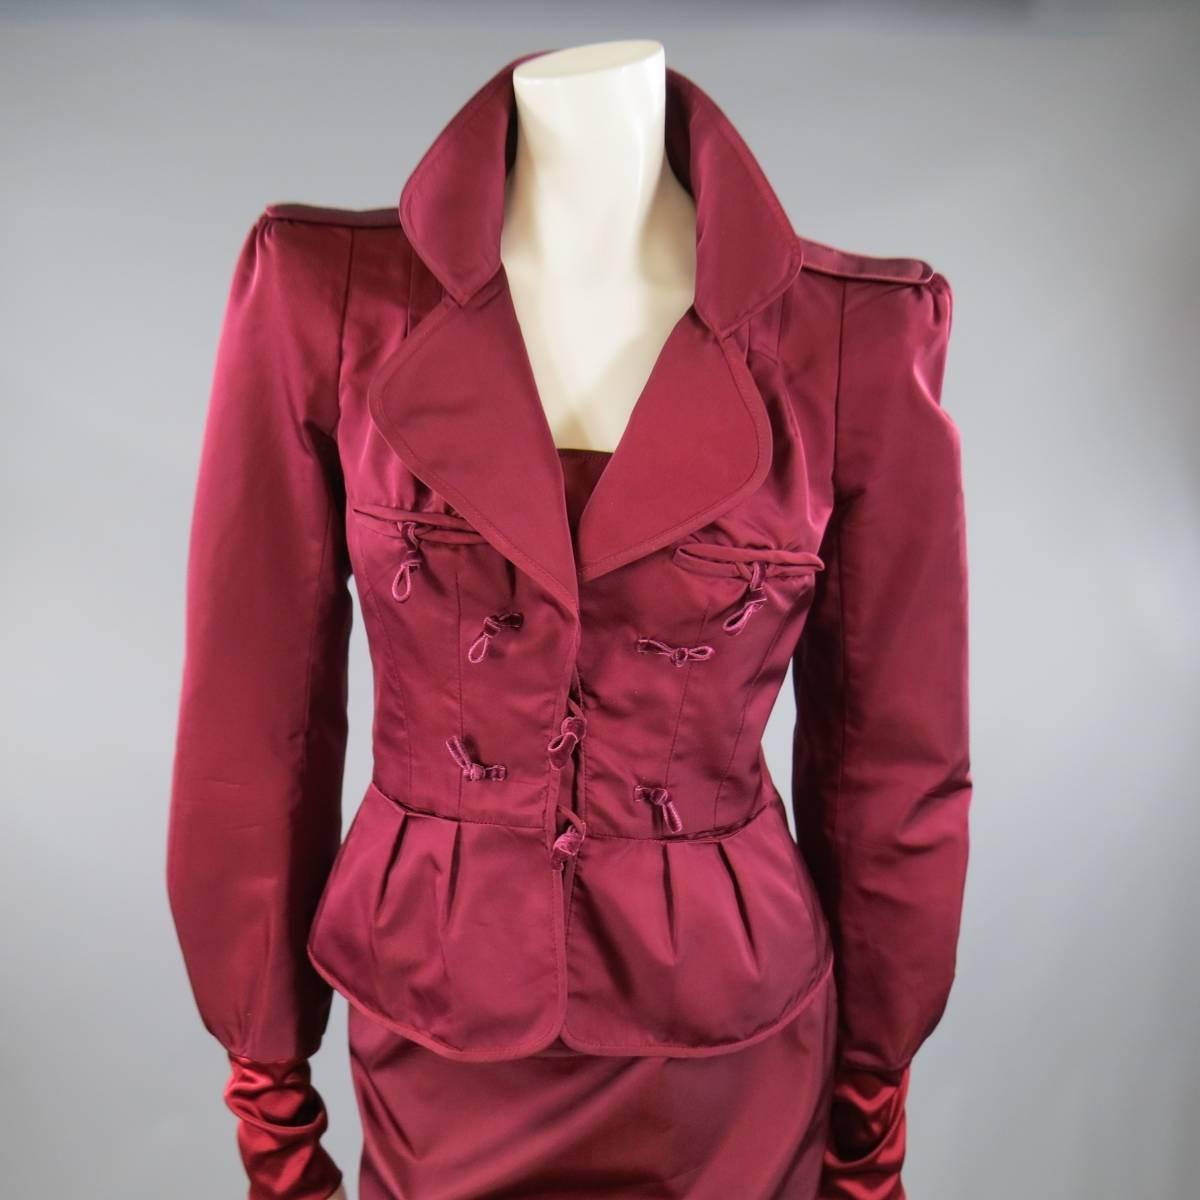 This rare archival YVES SAINT LAURENT by TOM FORD skirt suit comes in a rich Burgundy red silk semi-matte satin and includes a cropped jacket with padded epaulet shoulders, pleated peplum silhouette, long sleeves with banded cuff, and tied velvet